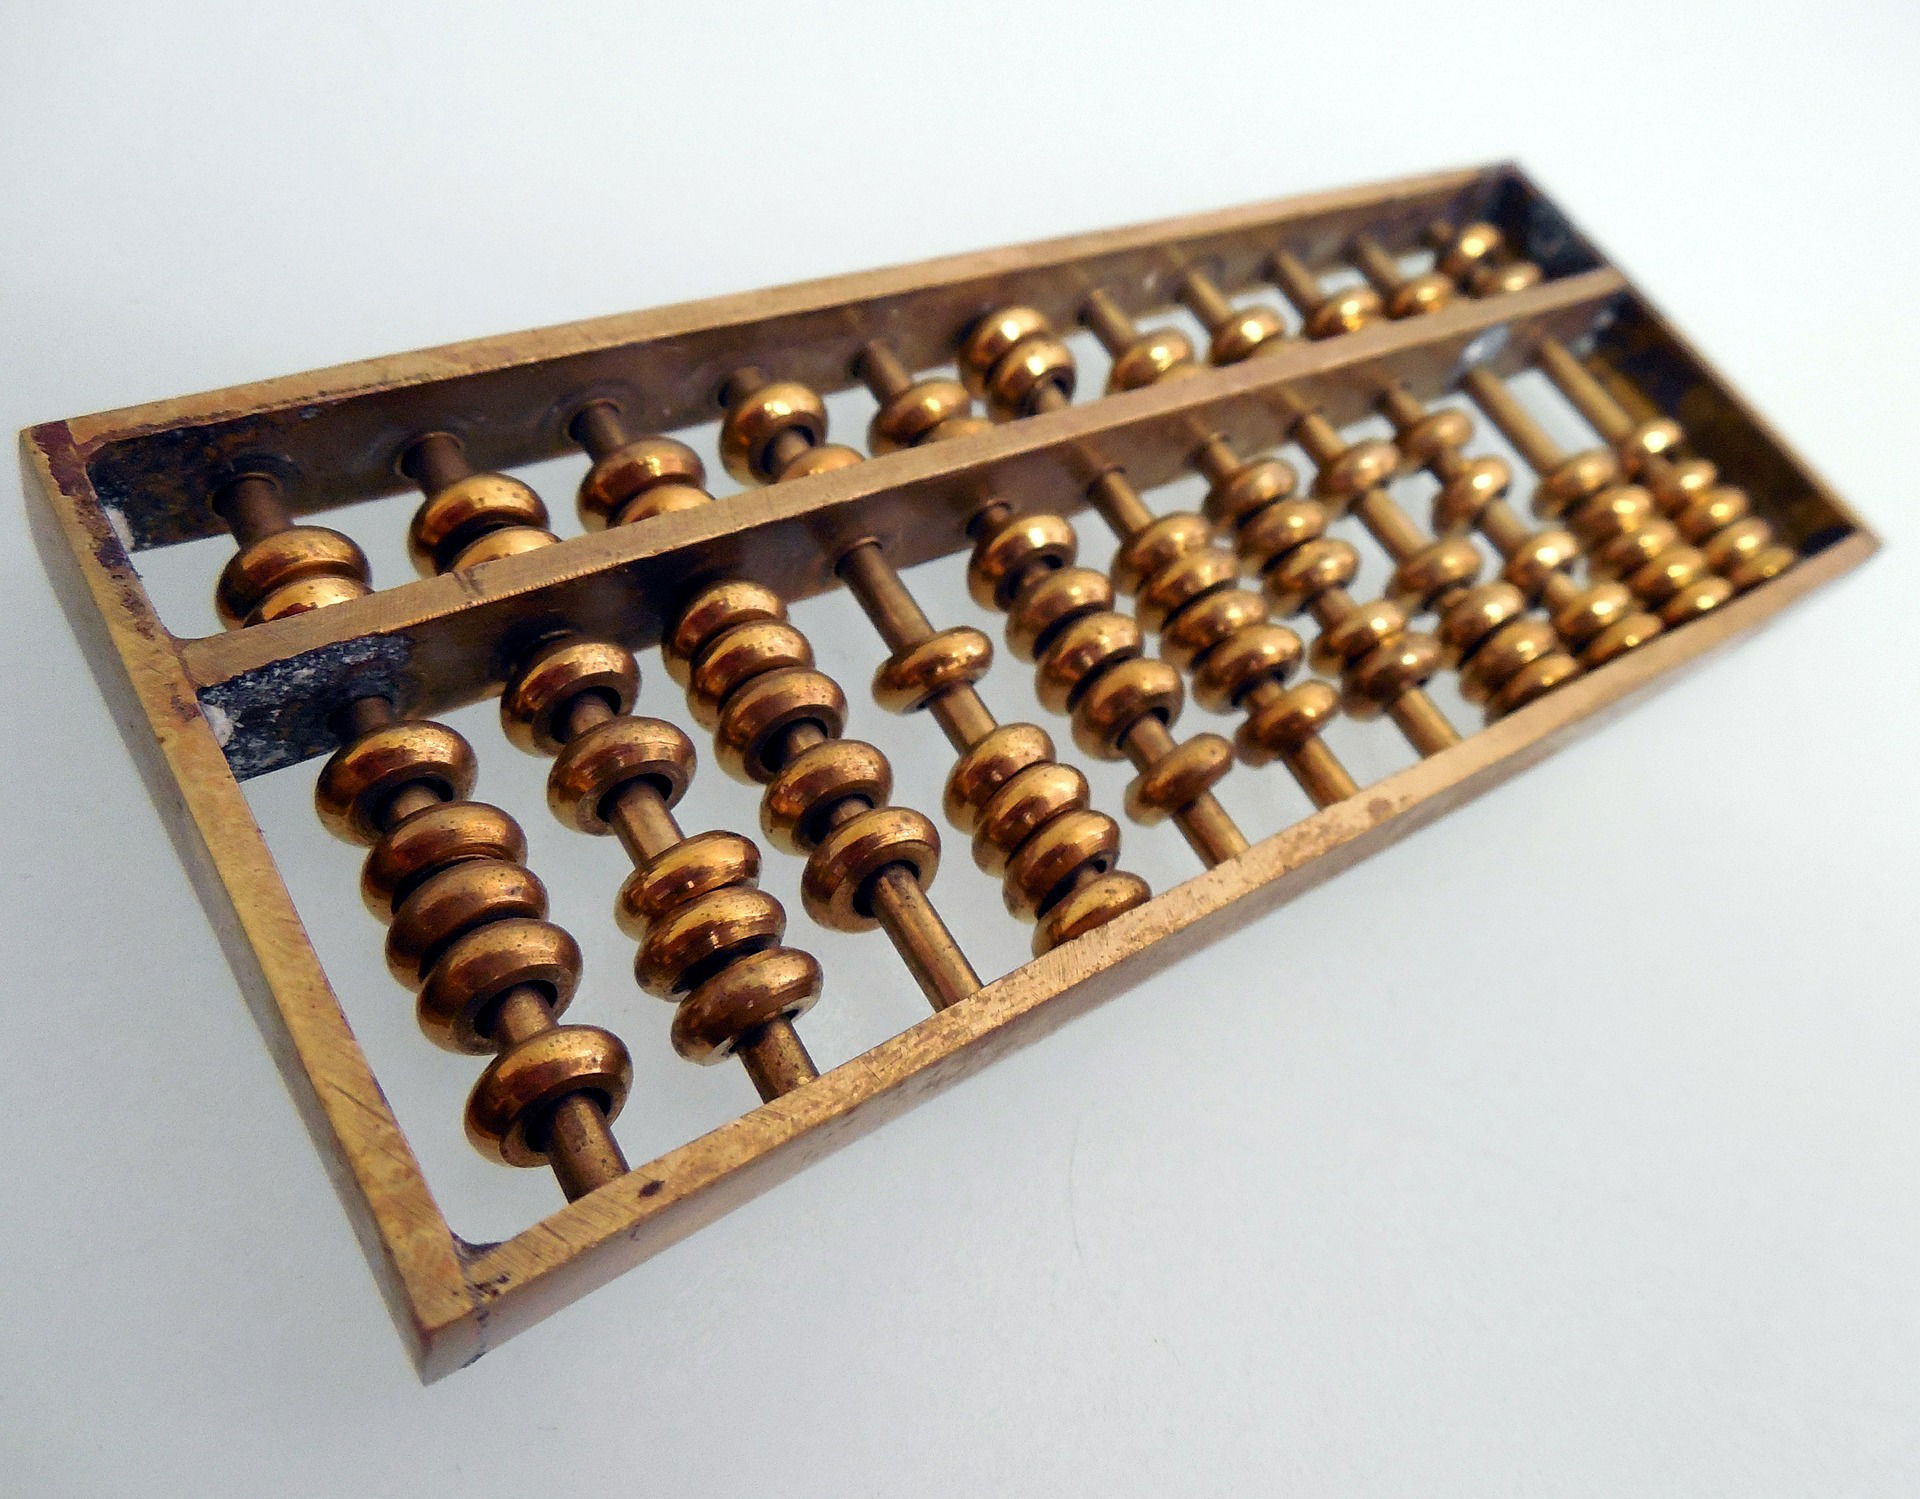 Abacus: Ancient Tool, Modern Influence